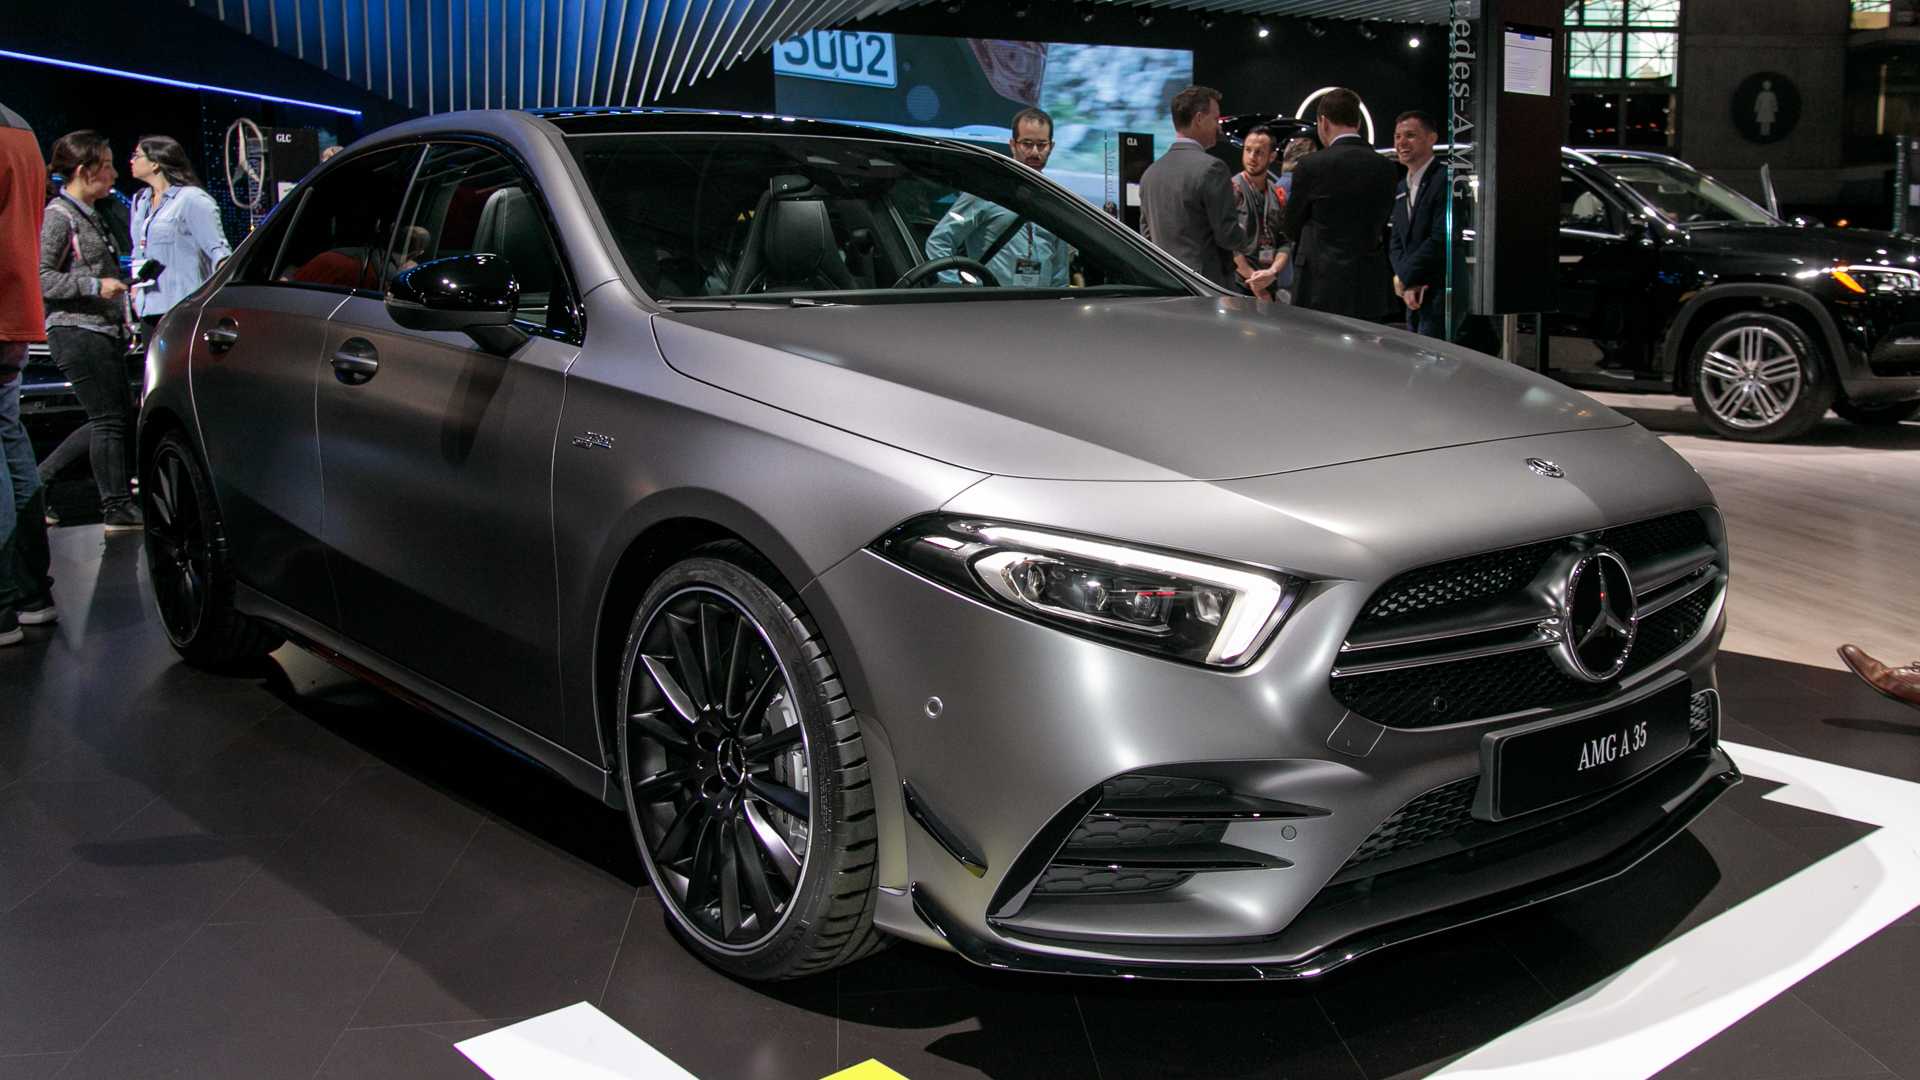 2020 Mercedes-AMG A35 debuts at New York Auto Show